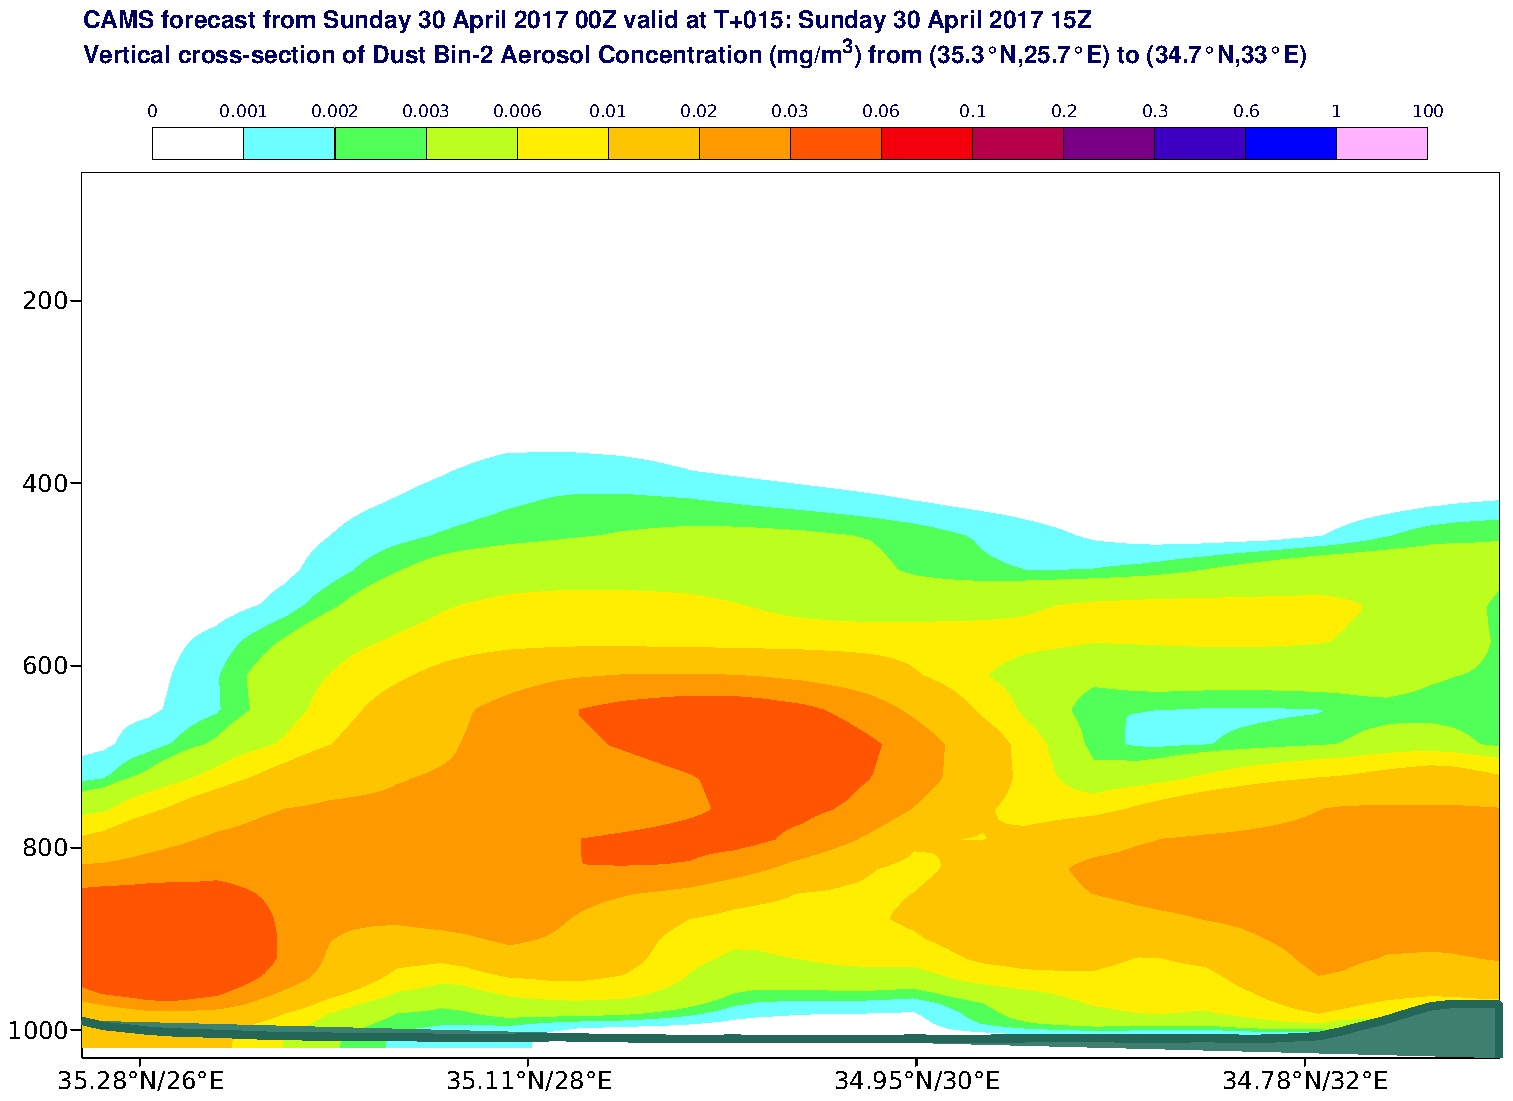 Vertical cross-section of Dust Bin-2 Aerosol Concentration (mg/m3) valid at T15 - 2017-04-30 15:00